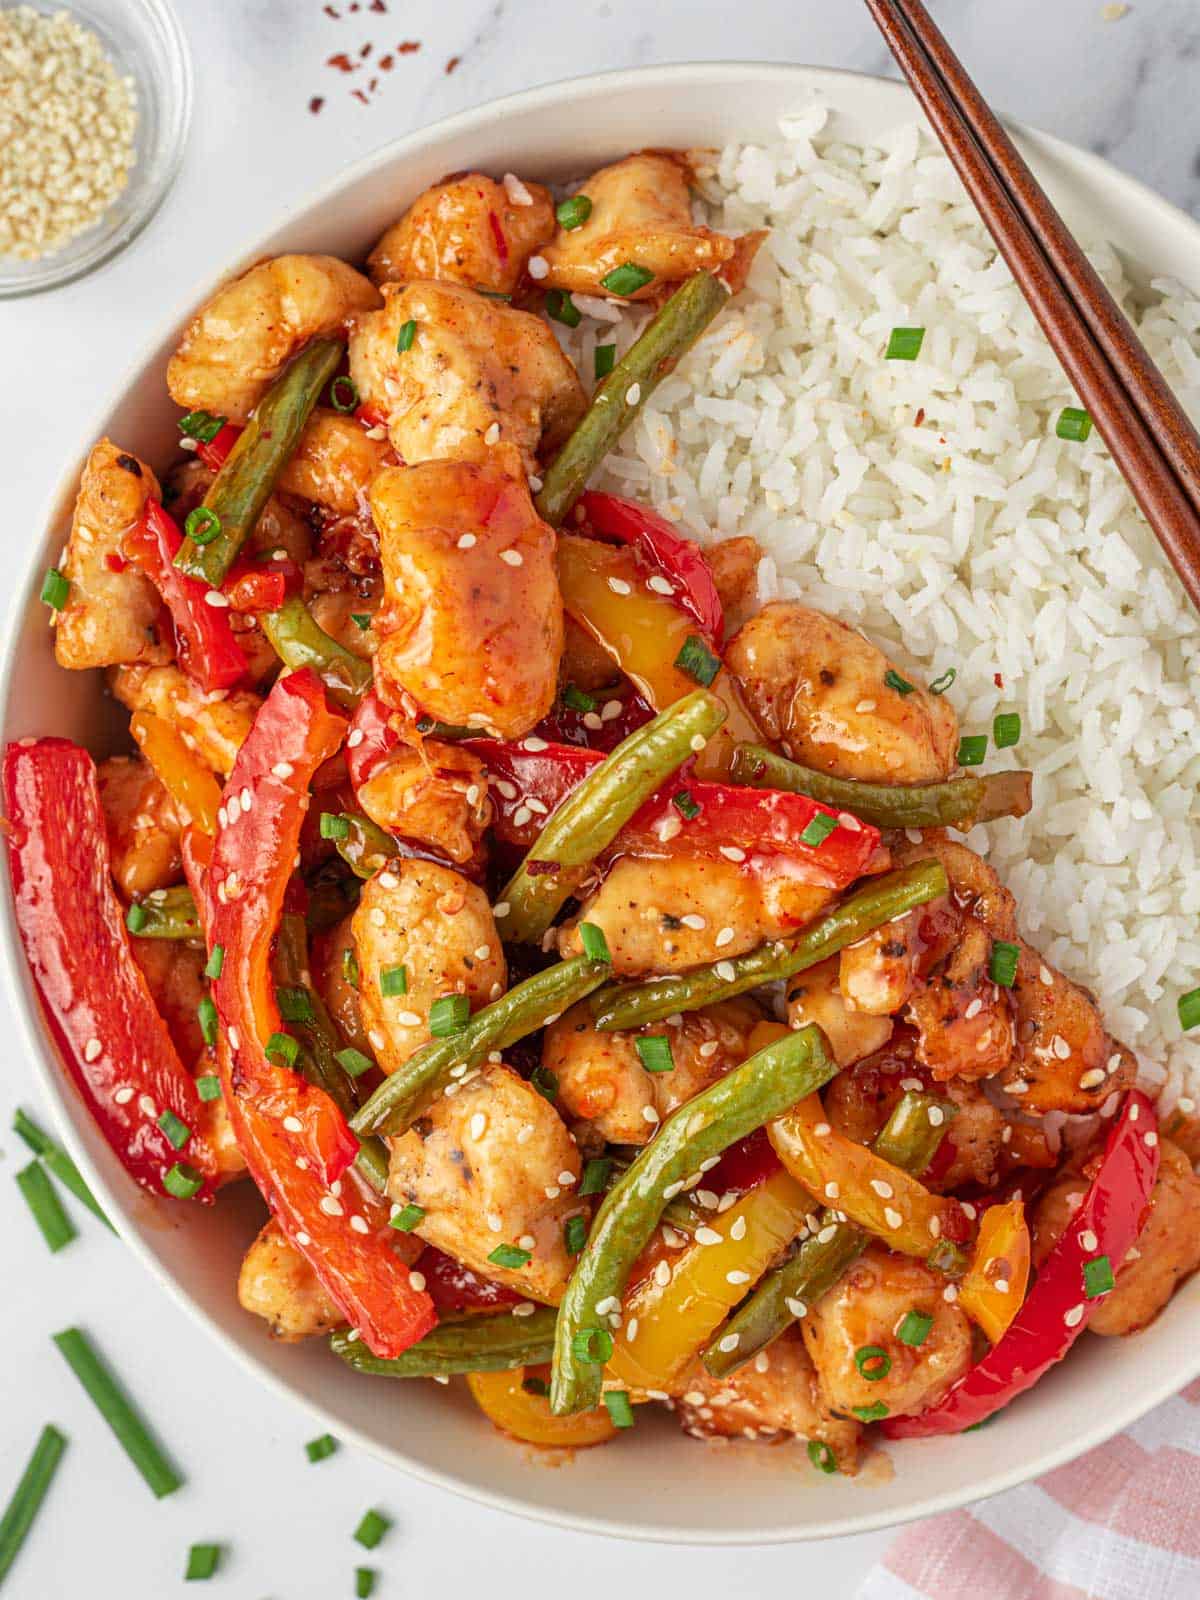 Sweet Thai chili chicken stir fry on a plate with rice and chopsticks.